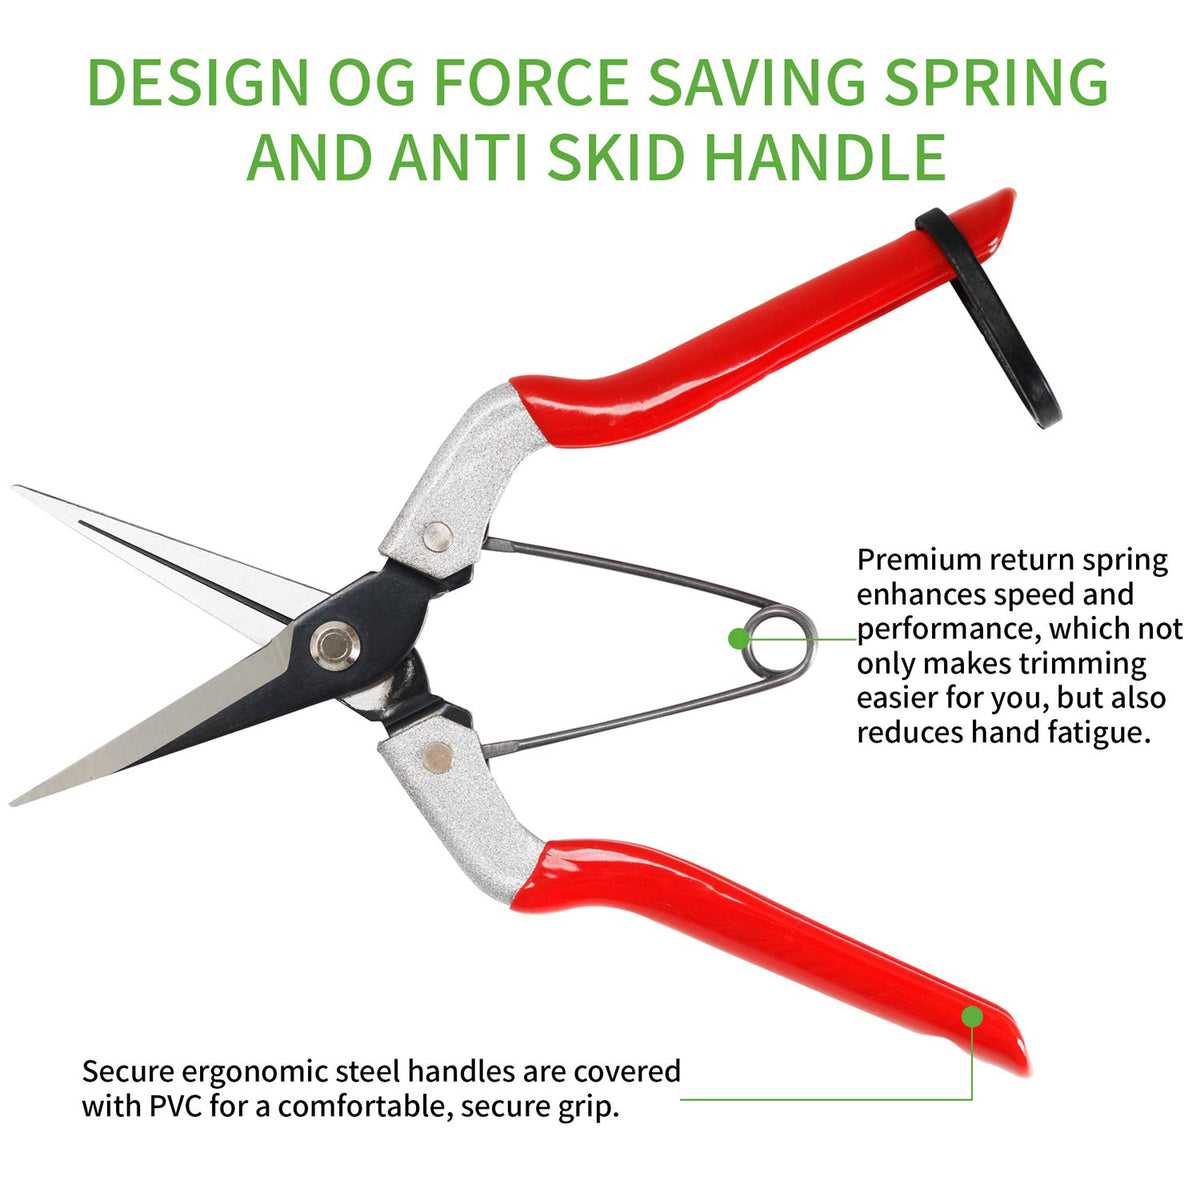 2Pack Gardening Bypass Hand Pruners-Pruning Shears Scissors Perfect for Cutting Thick Branches-GARTOL